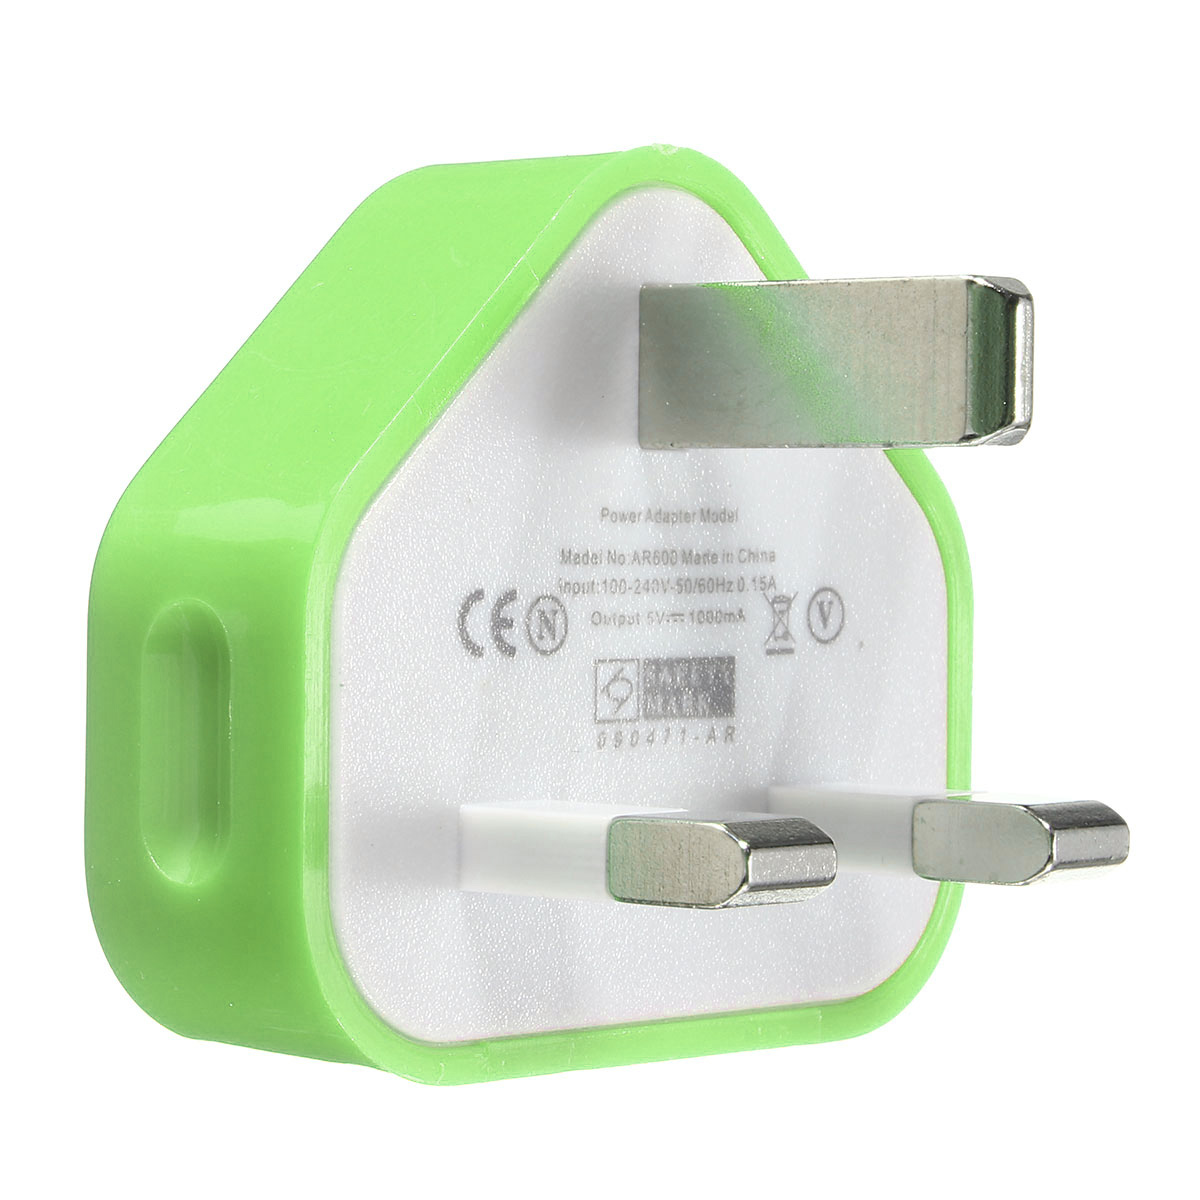 UK-USB-Plug-Charger-Mains-Wall-Home-Adapter-For-Samsung-Android-Phone-Tablets-1191576-5